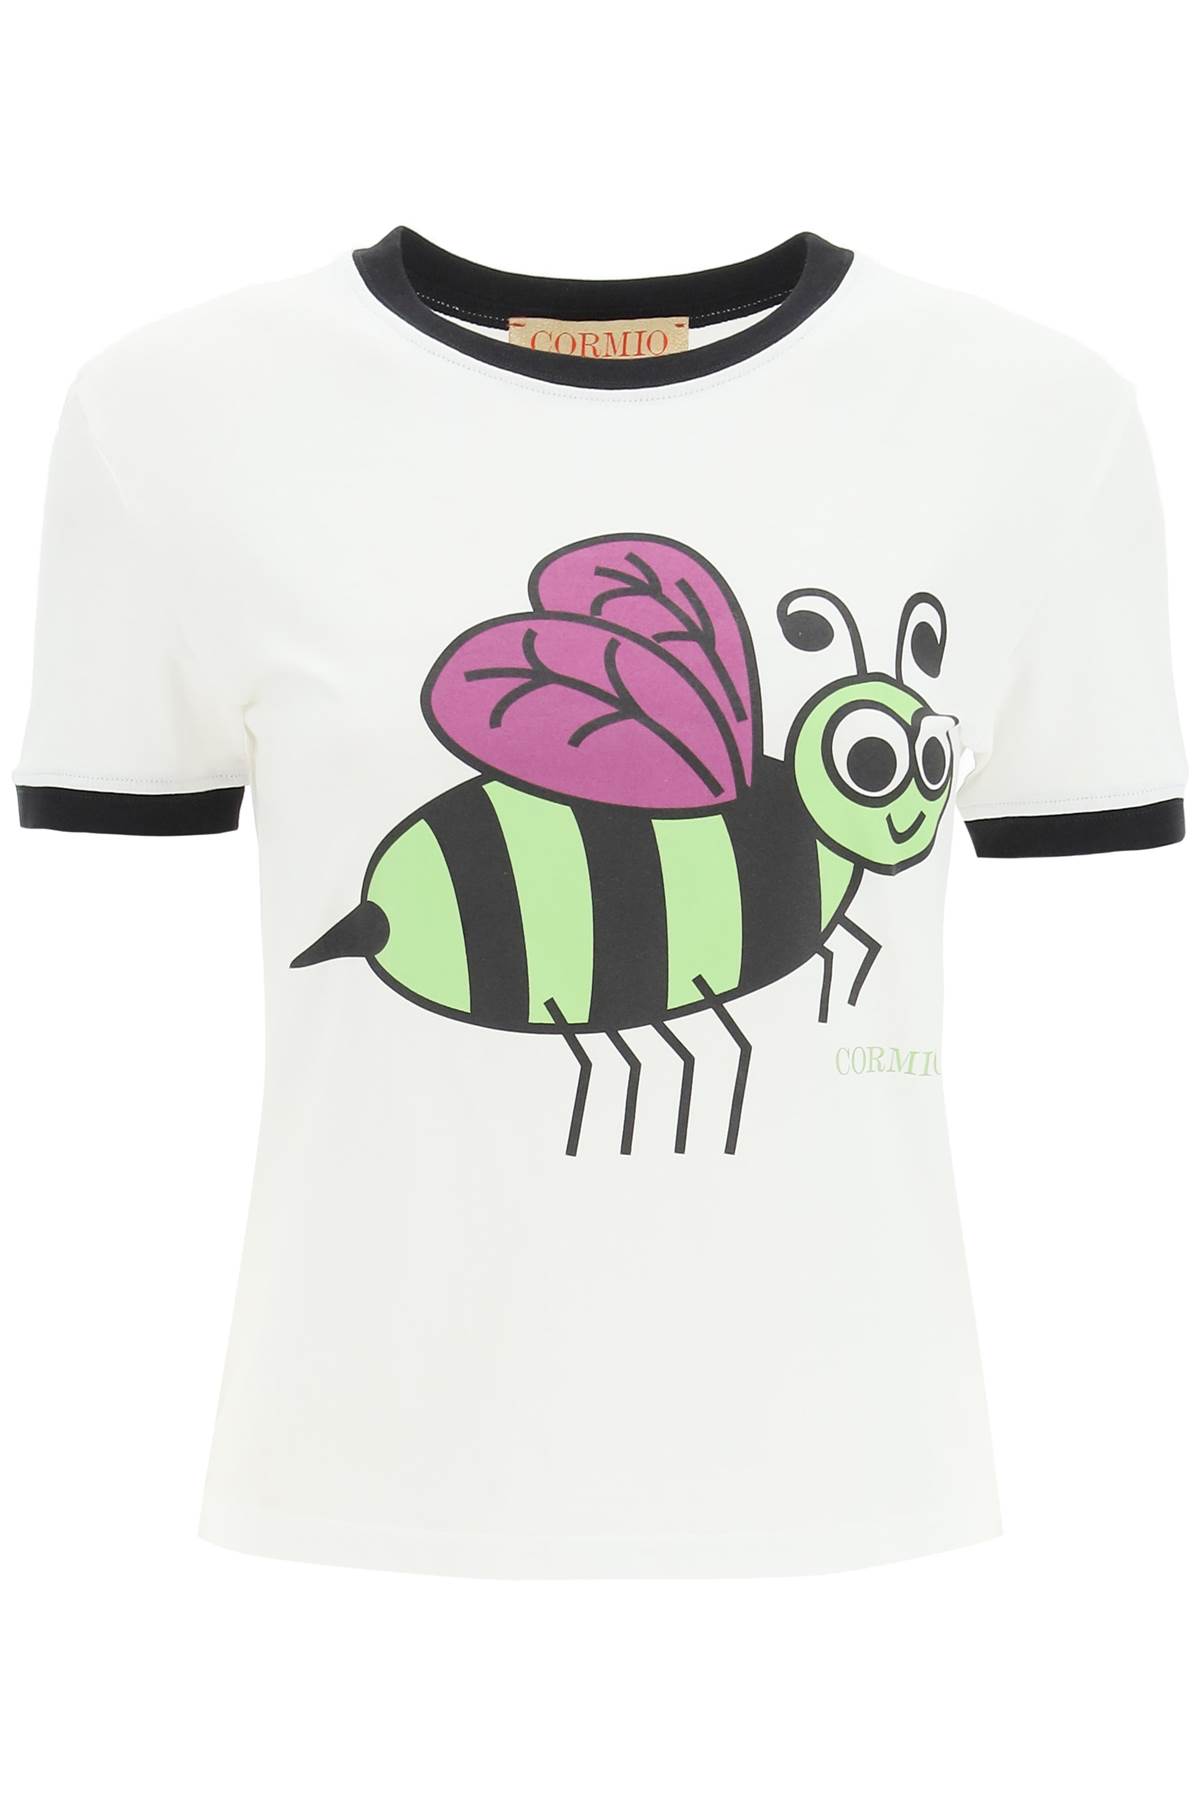 Cormio busy As A Bee T-shirt